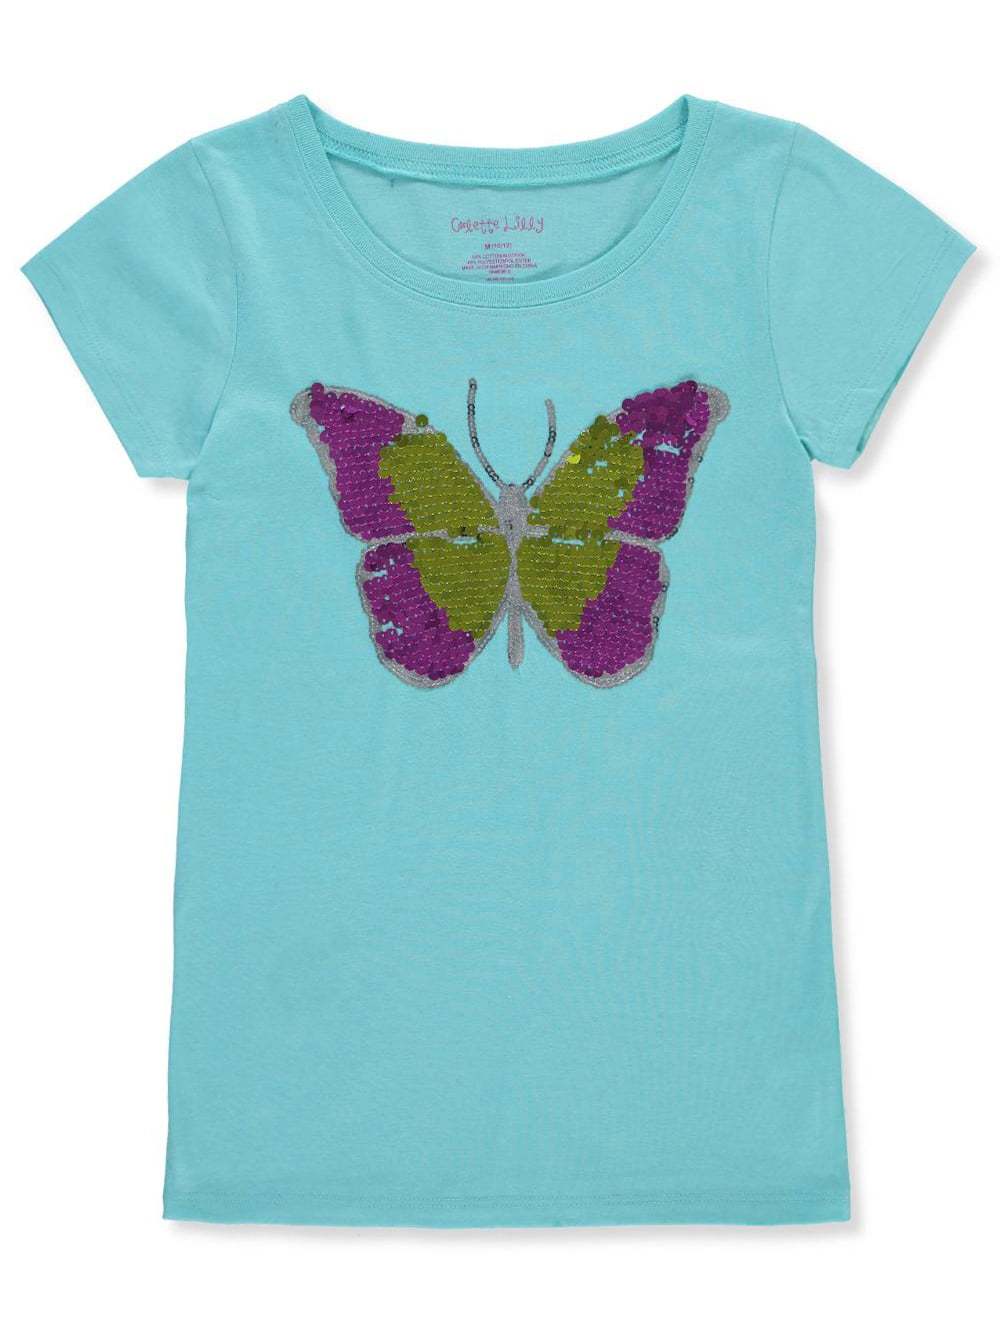 Colette Lilly - Colette Lilly Big Girls' T-Shirt - seafoam, 14-16 ...